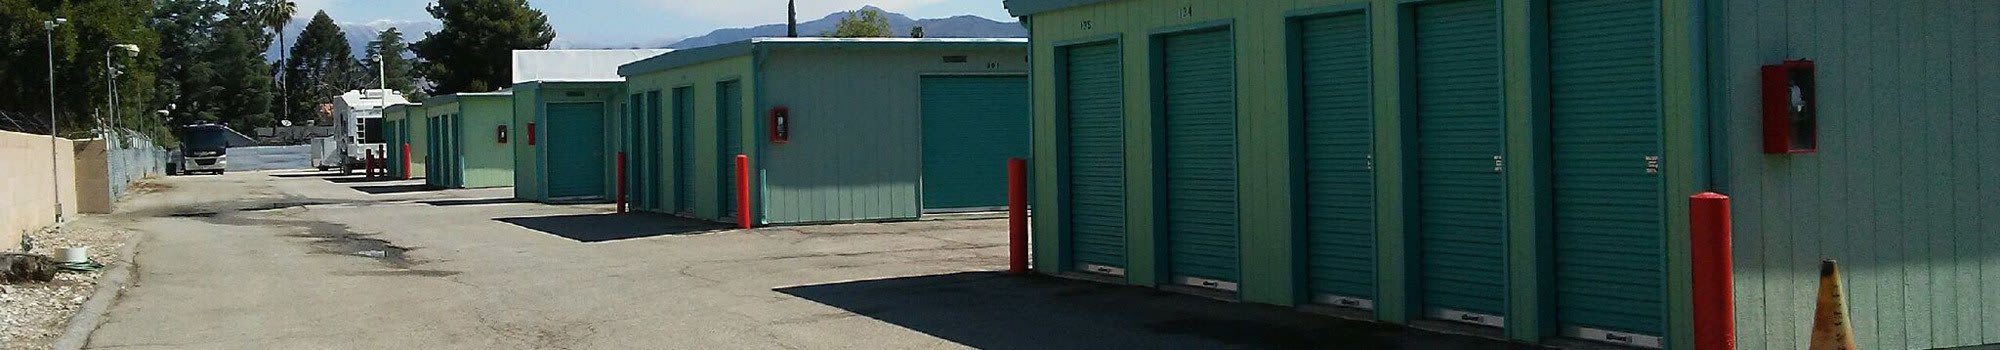 Unit sizes and prices at Handi Storage in Calimesa, California